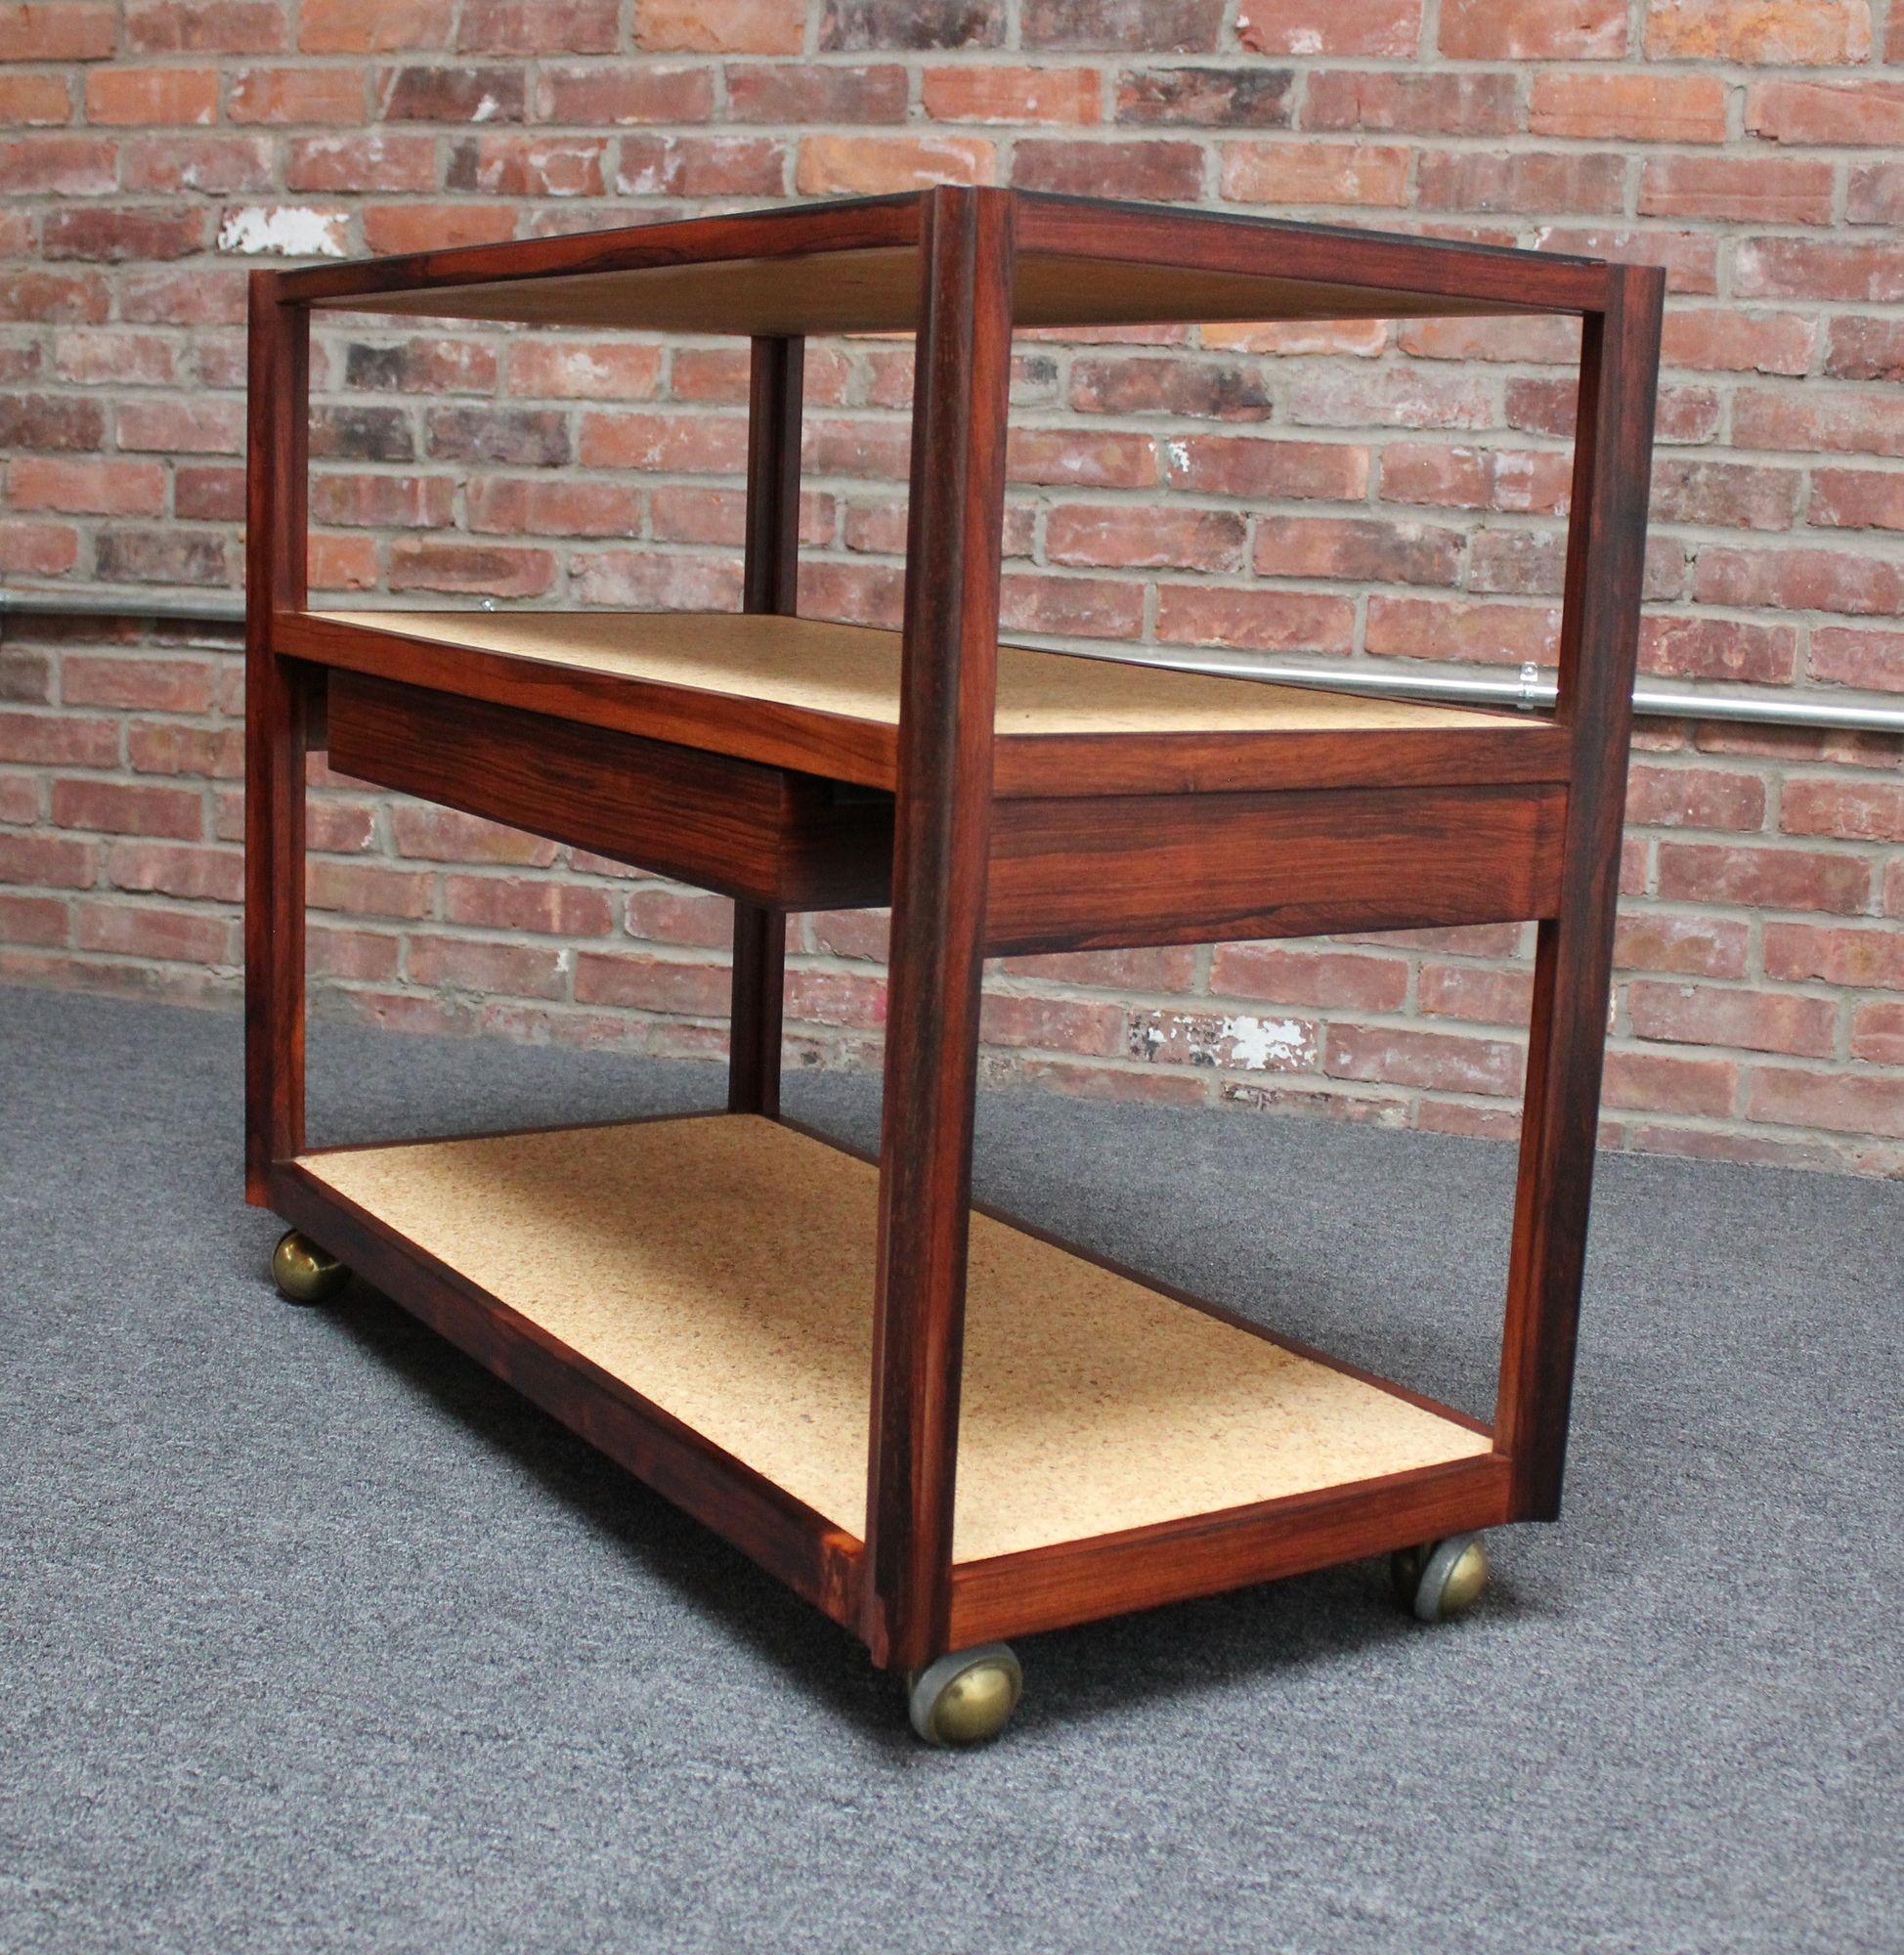 Three-tiered bar cart/tea trolley Model No. 6409 designed by Roger Sprunger for Dunbar (Indiana, USA, circa 1960s).
Composed of a inset slate top with two lower cork surfaces and a shallow drawer for accessories, all supported by brass caster wheels